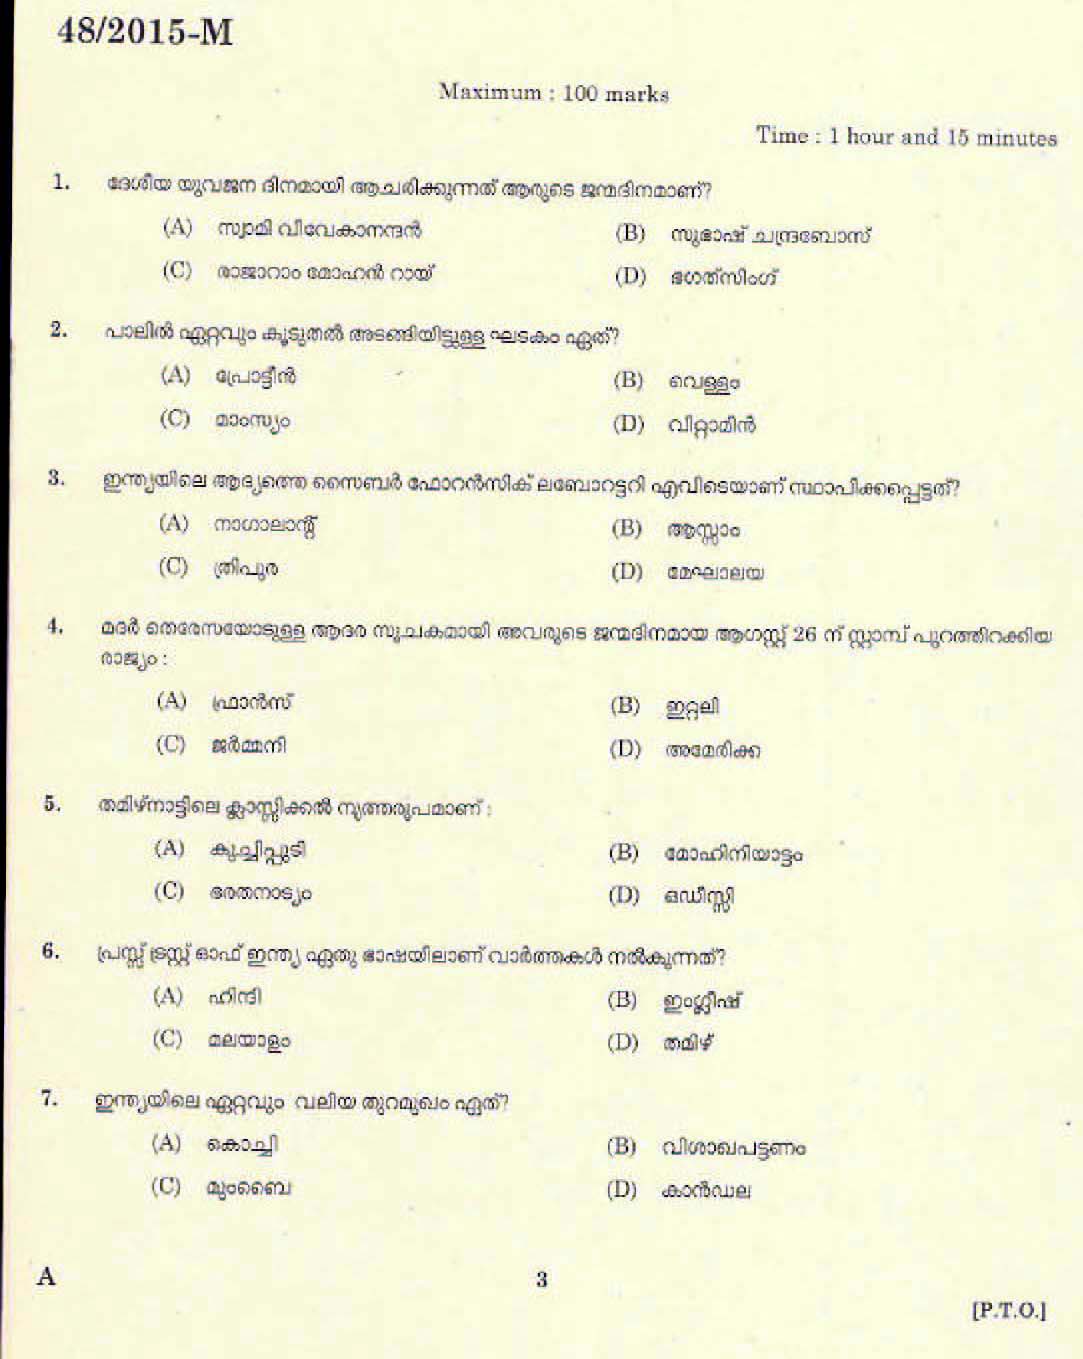 LD Clerk Bill Collector Question Paper Malayalam 2015 Paper Code 482015 M 1